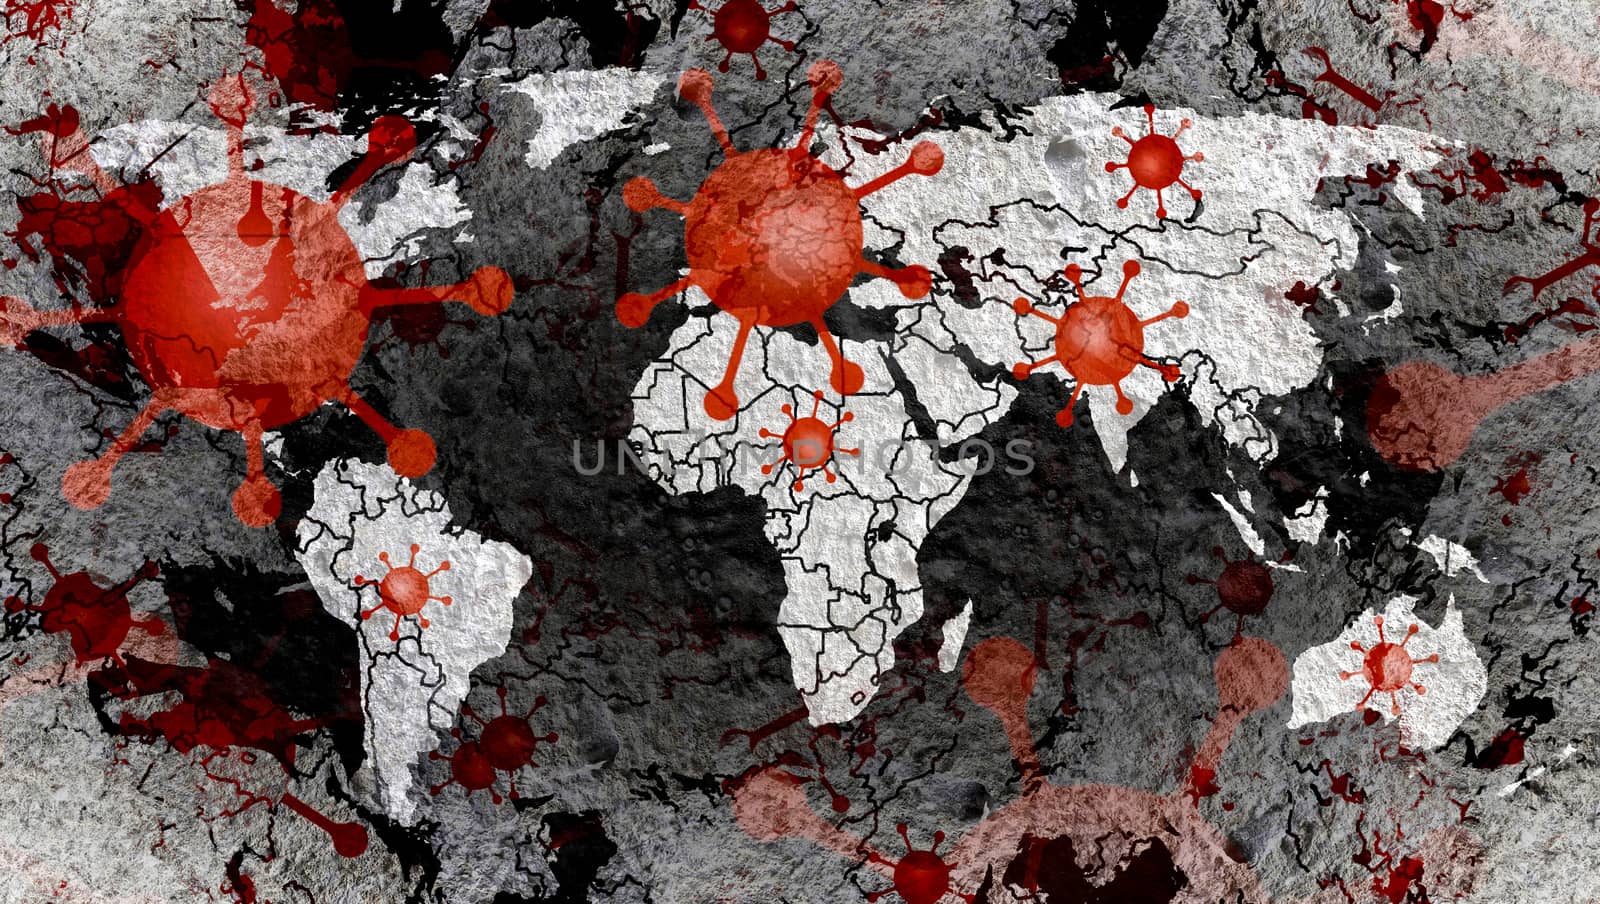 3D-Illustration of a world map showing the corona virus covid-19 by MP_foto71